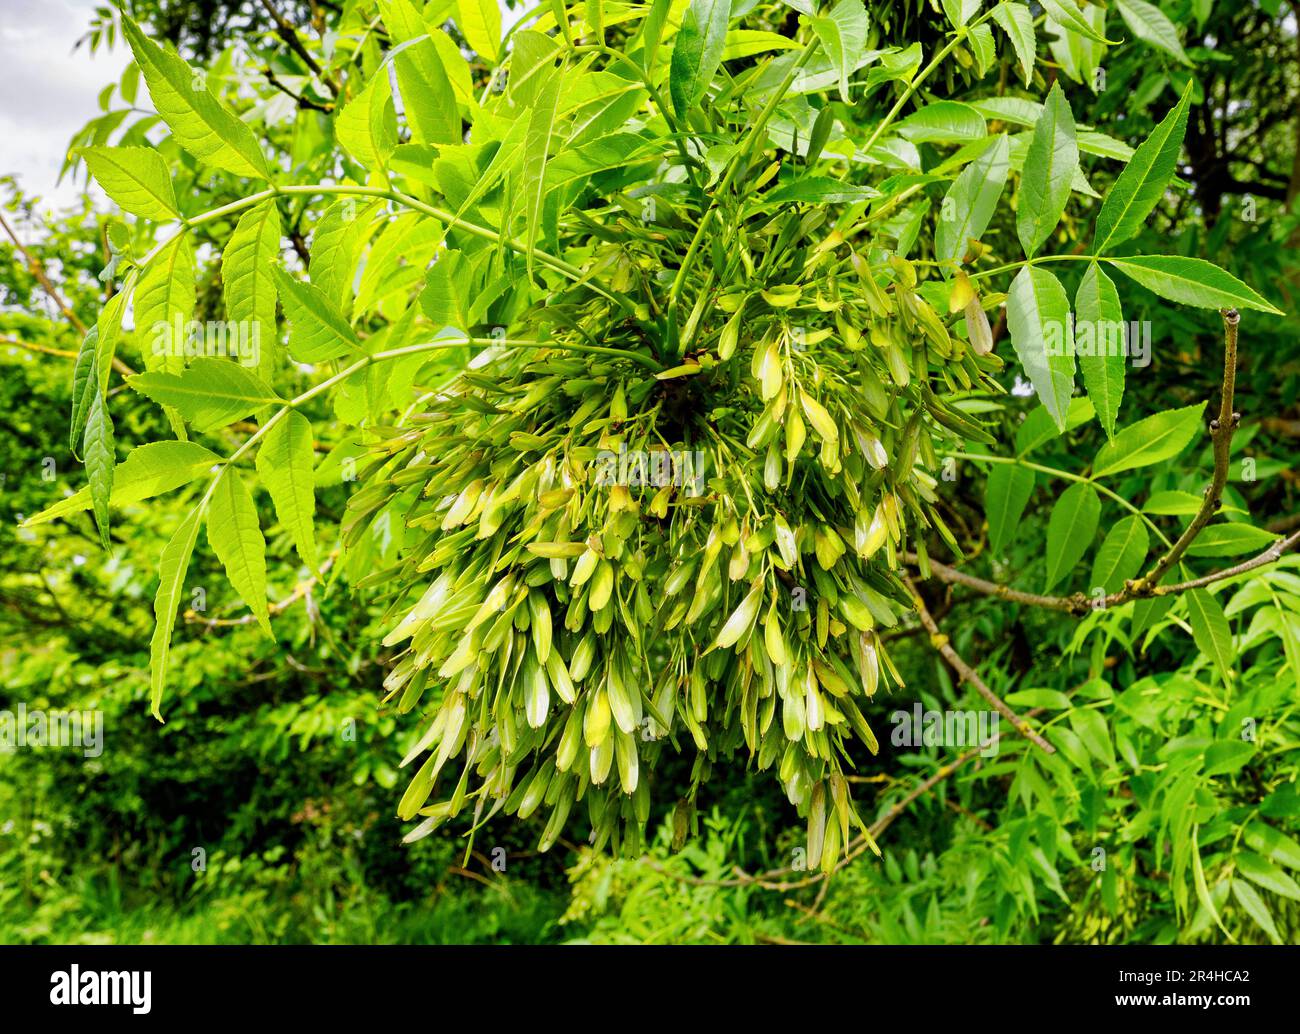 Bunches of Ash keys or fruits hanging from a healthy young Ash tree Fraxinus exelsior in Somerset UK Stock Photo